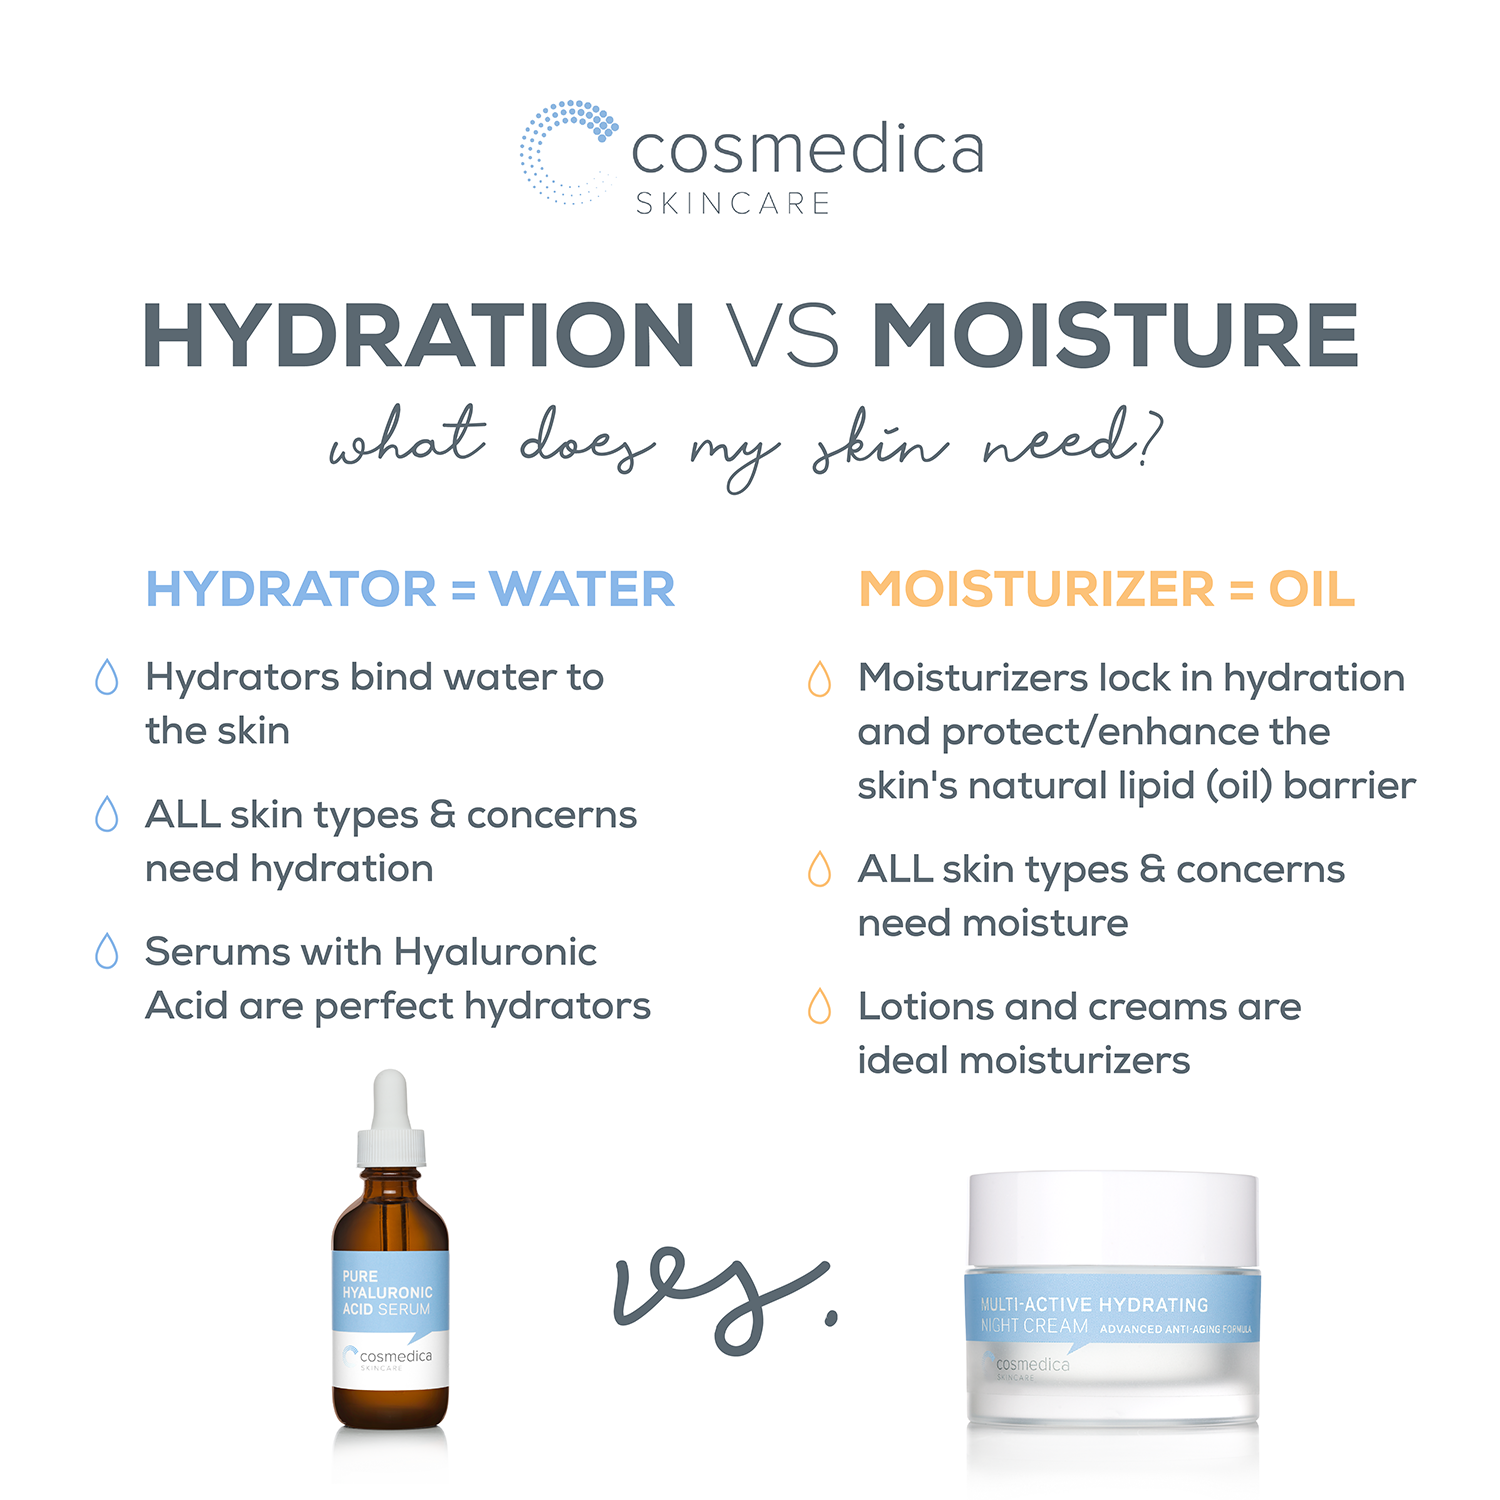 Hydration for all skin types